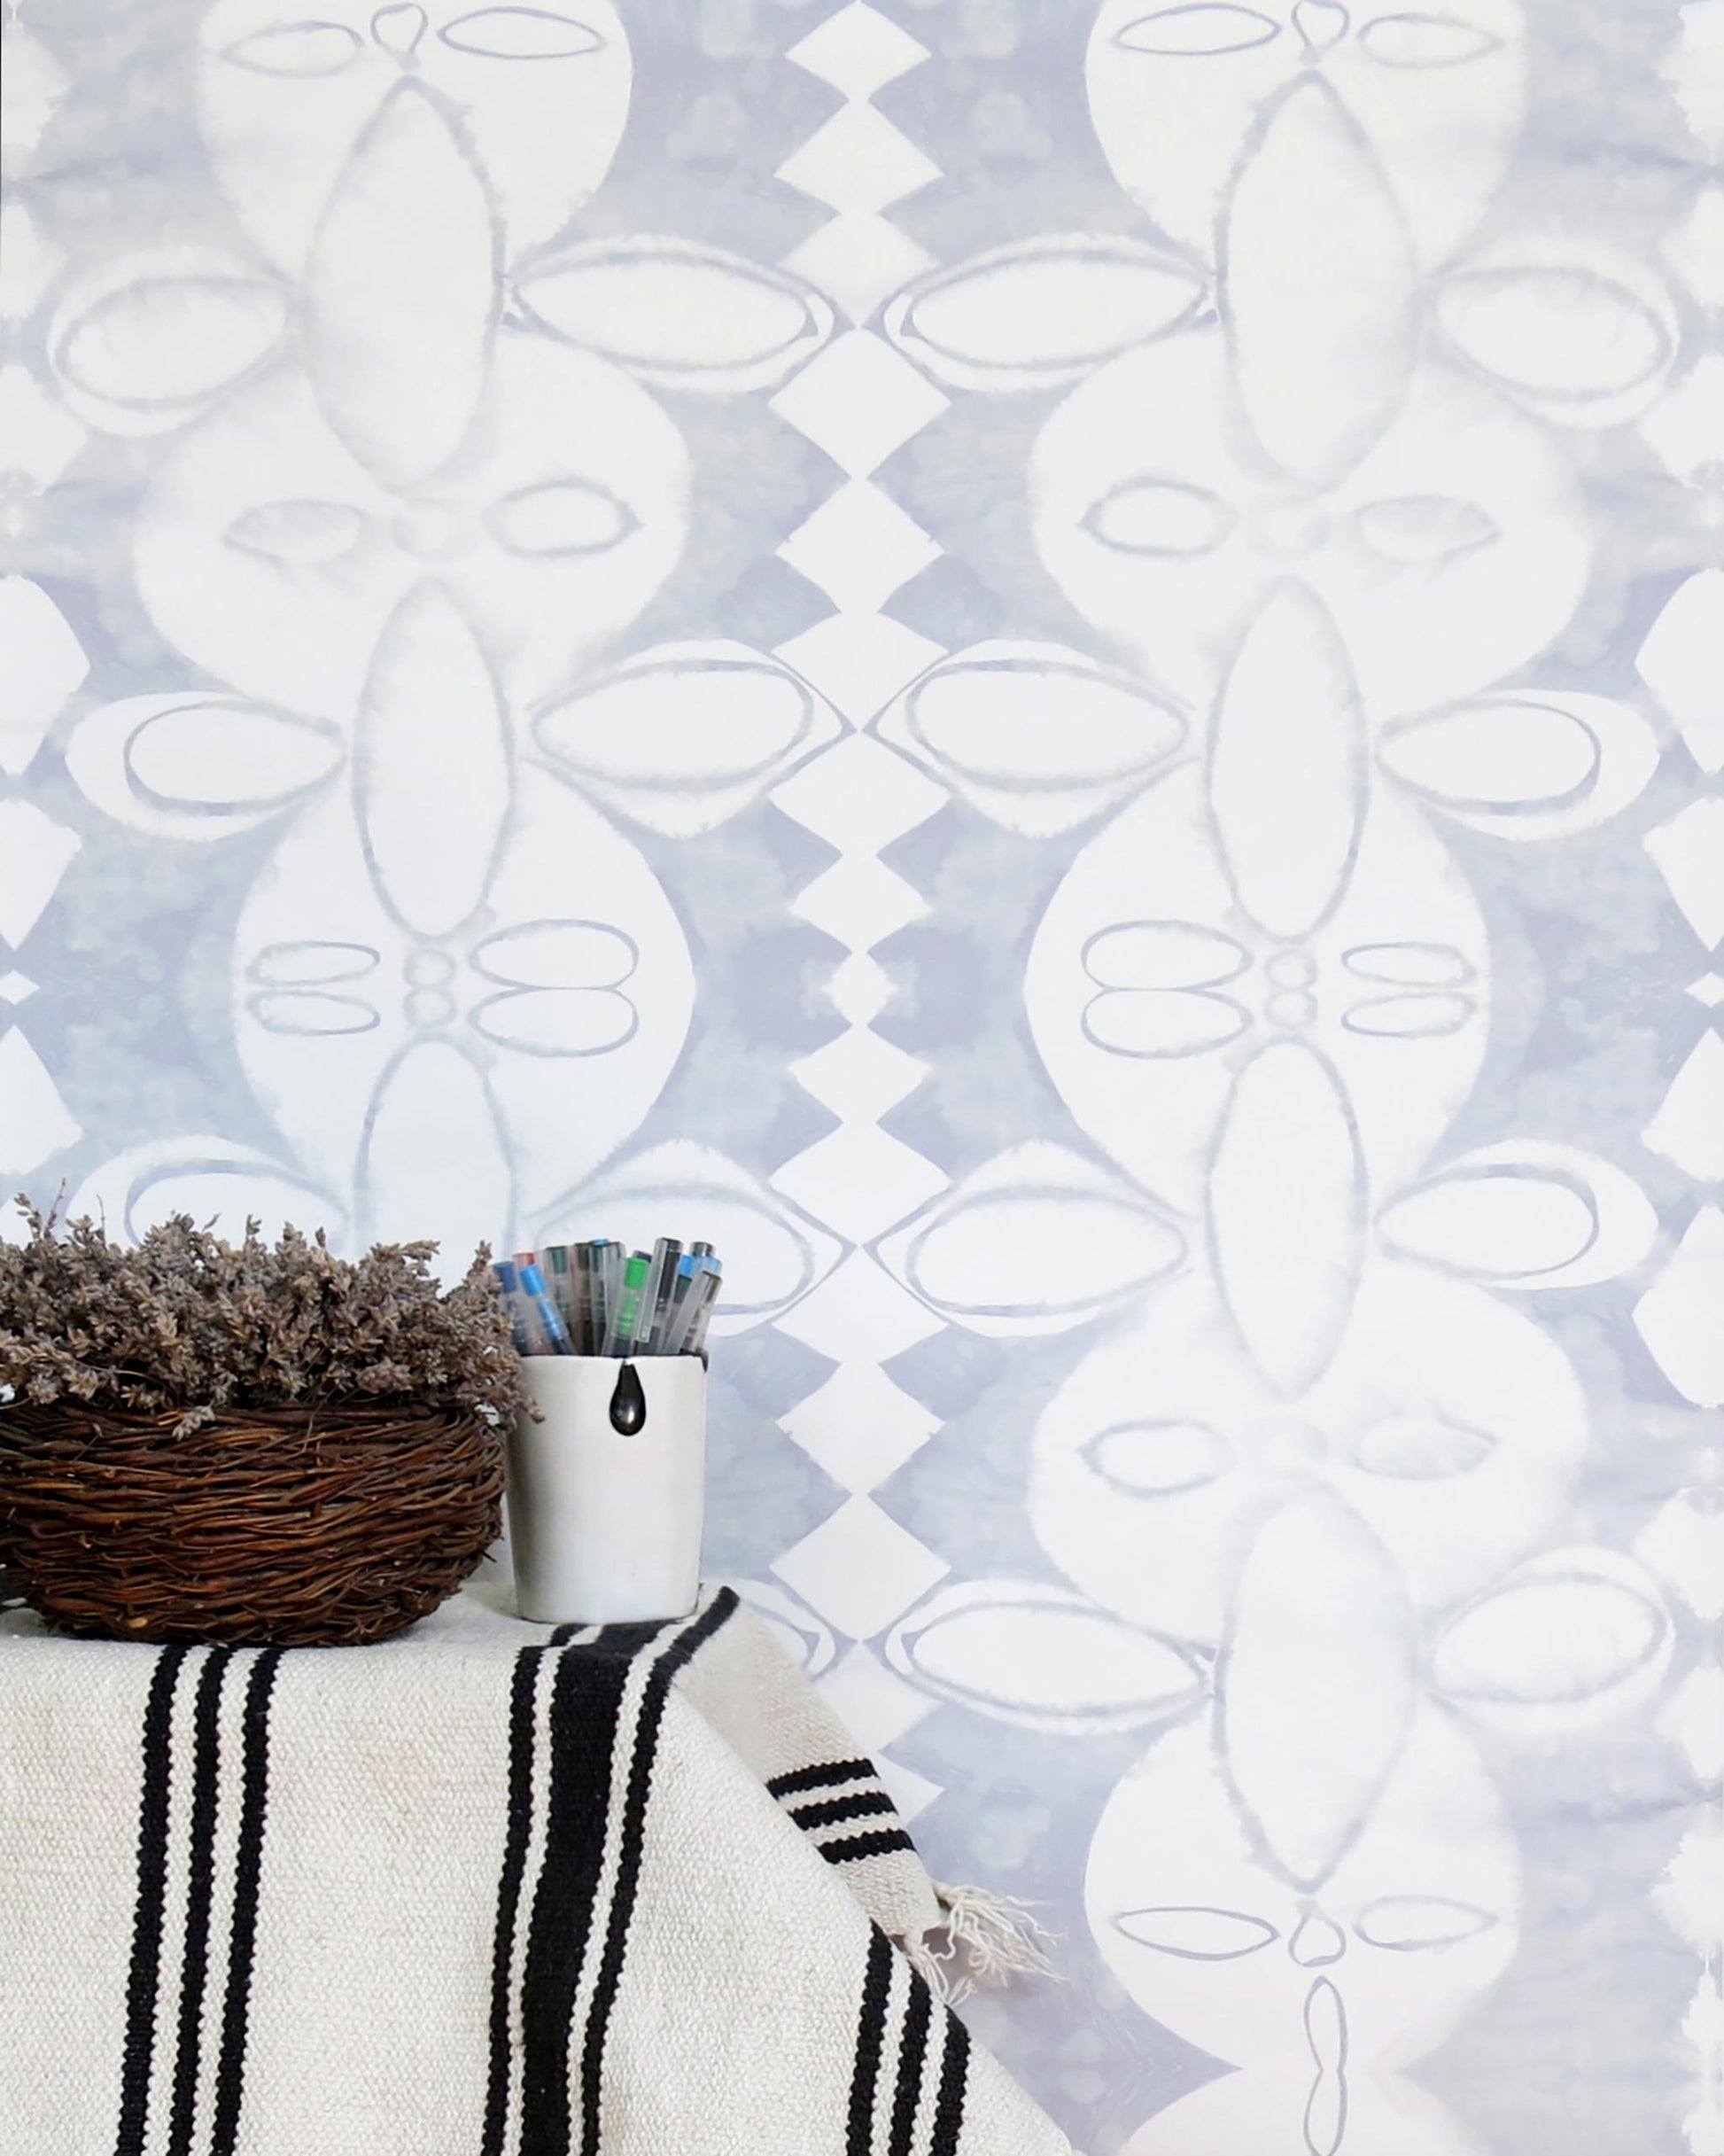 Coconut Chine Wallpaper||Mist on a table next to a wicker basket.